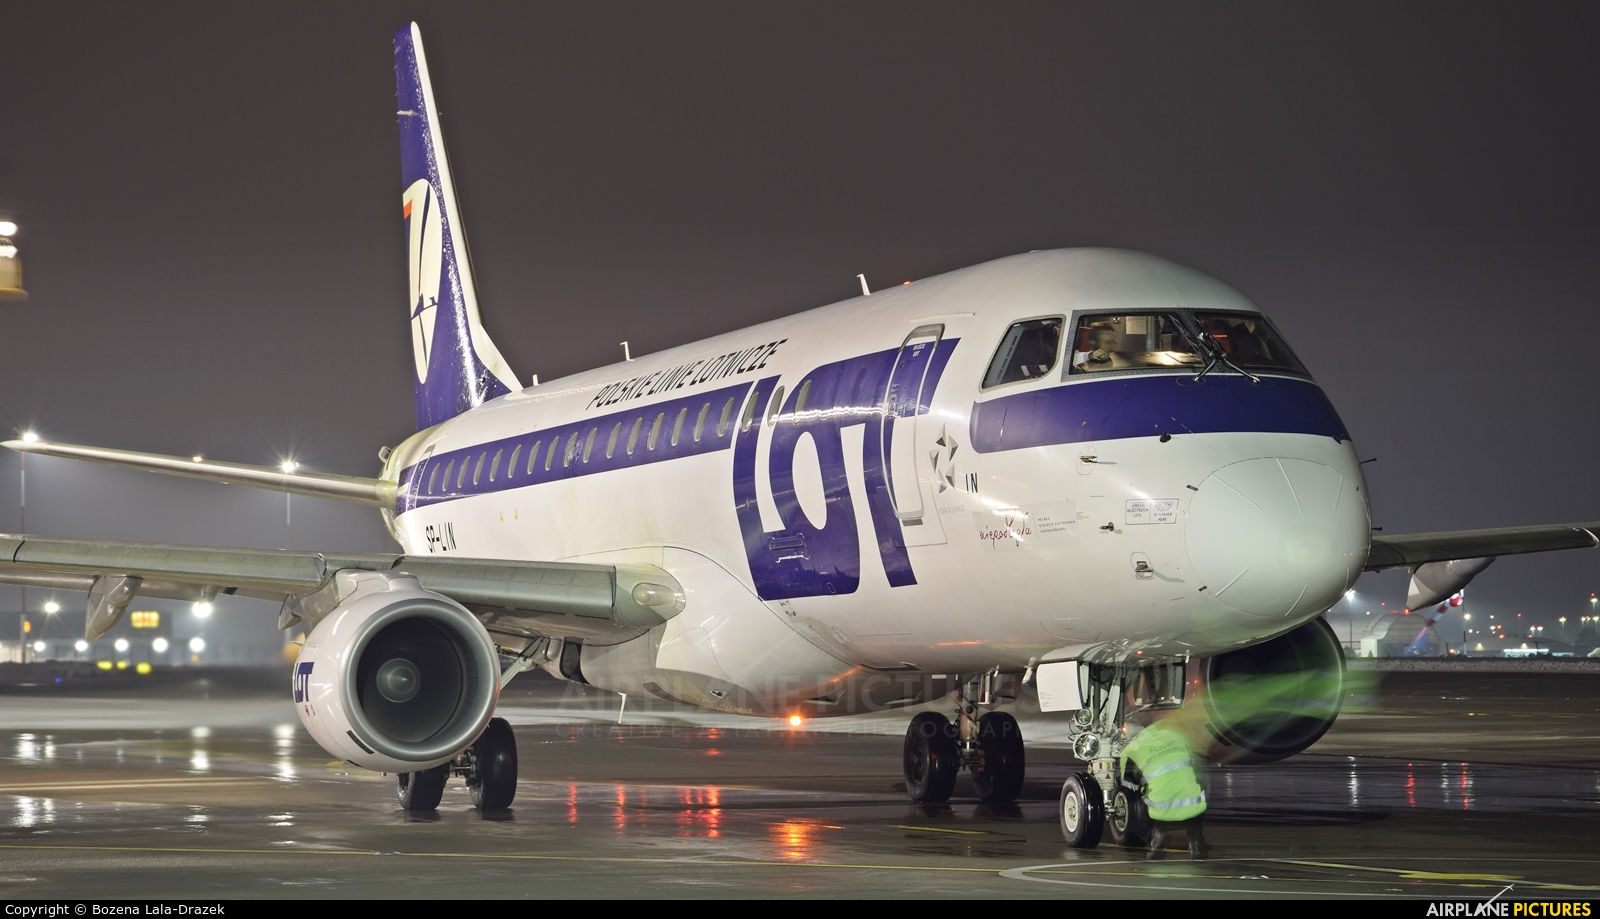 LOT - Polish Airlines SP-LIN aircraft at Katowice - Pyrzowice